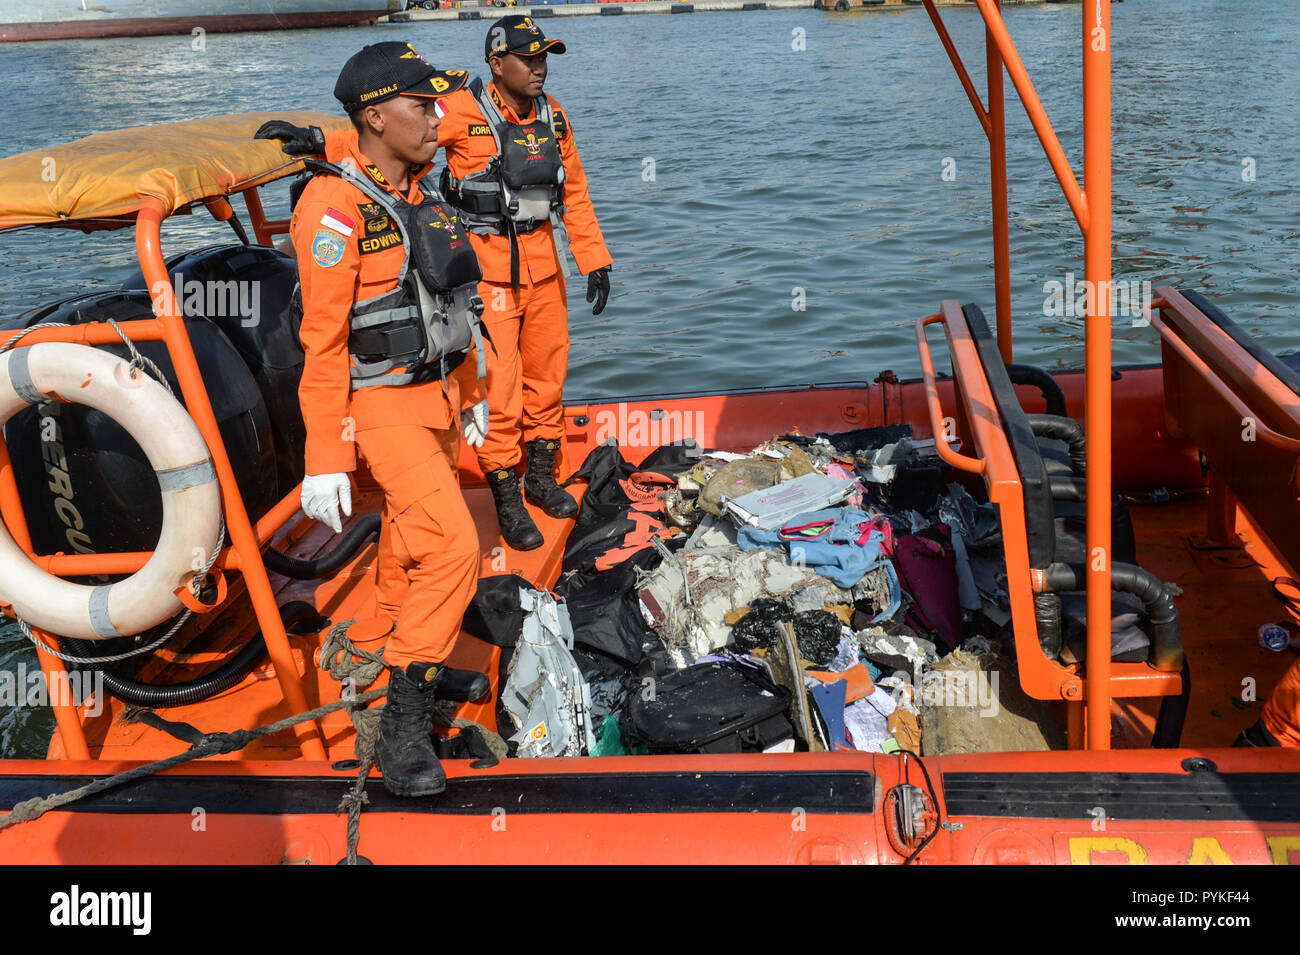 Jakarta, Indonesia. 29th Oct, 2018. Search and Rescue officers stand on the speed boat carrying debris of passenger jet and body of victims at the Tanjung Priok port, Jakarta, Indonesia, Oct. 29, 2018. A passenger plane of Indonesia's Lion Air with 189 people aboard crashed into the sea off Karawang of Indonesia's West Java province shortly after taking off from Jakarta Monday, head of the national Search and Rescue Office M. Syaugi said. Credit: Veri Sanovri/Xinhua/Alamy Live News Stock Photo